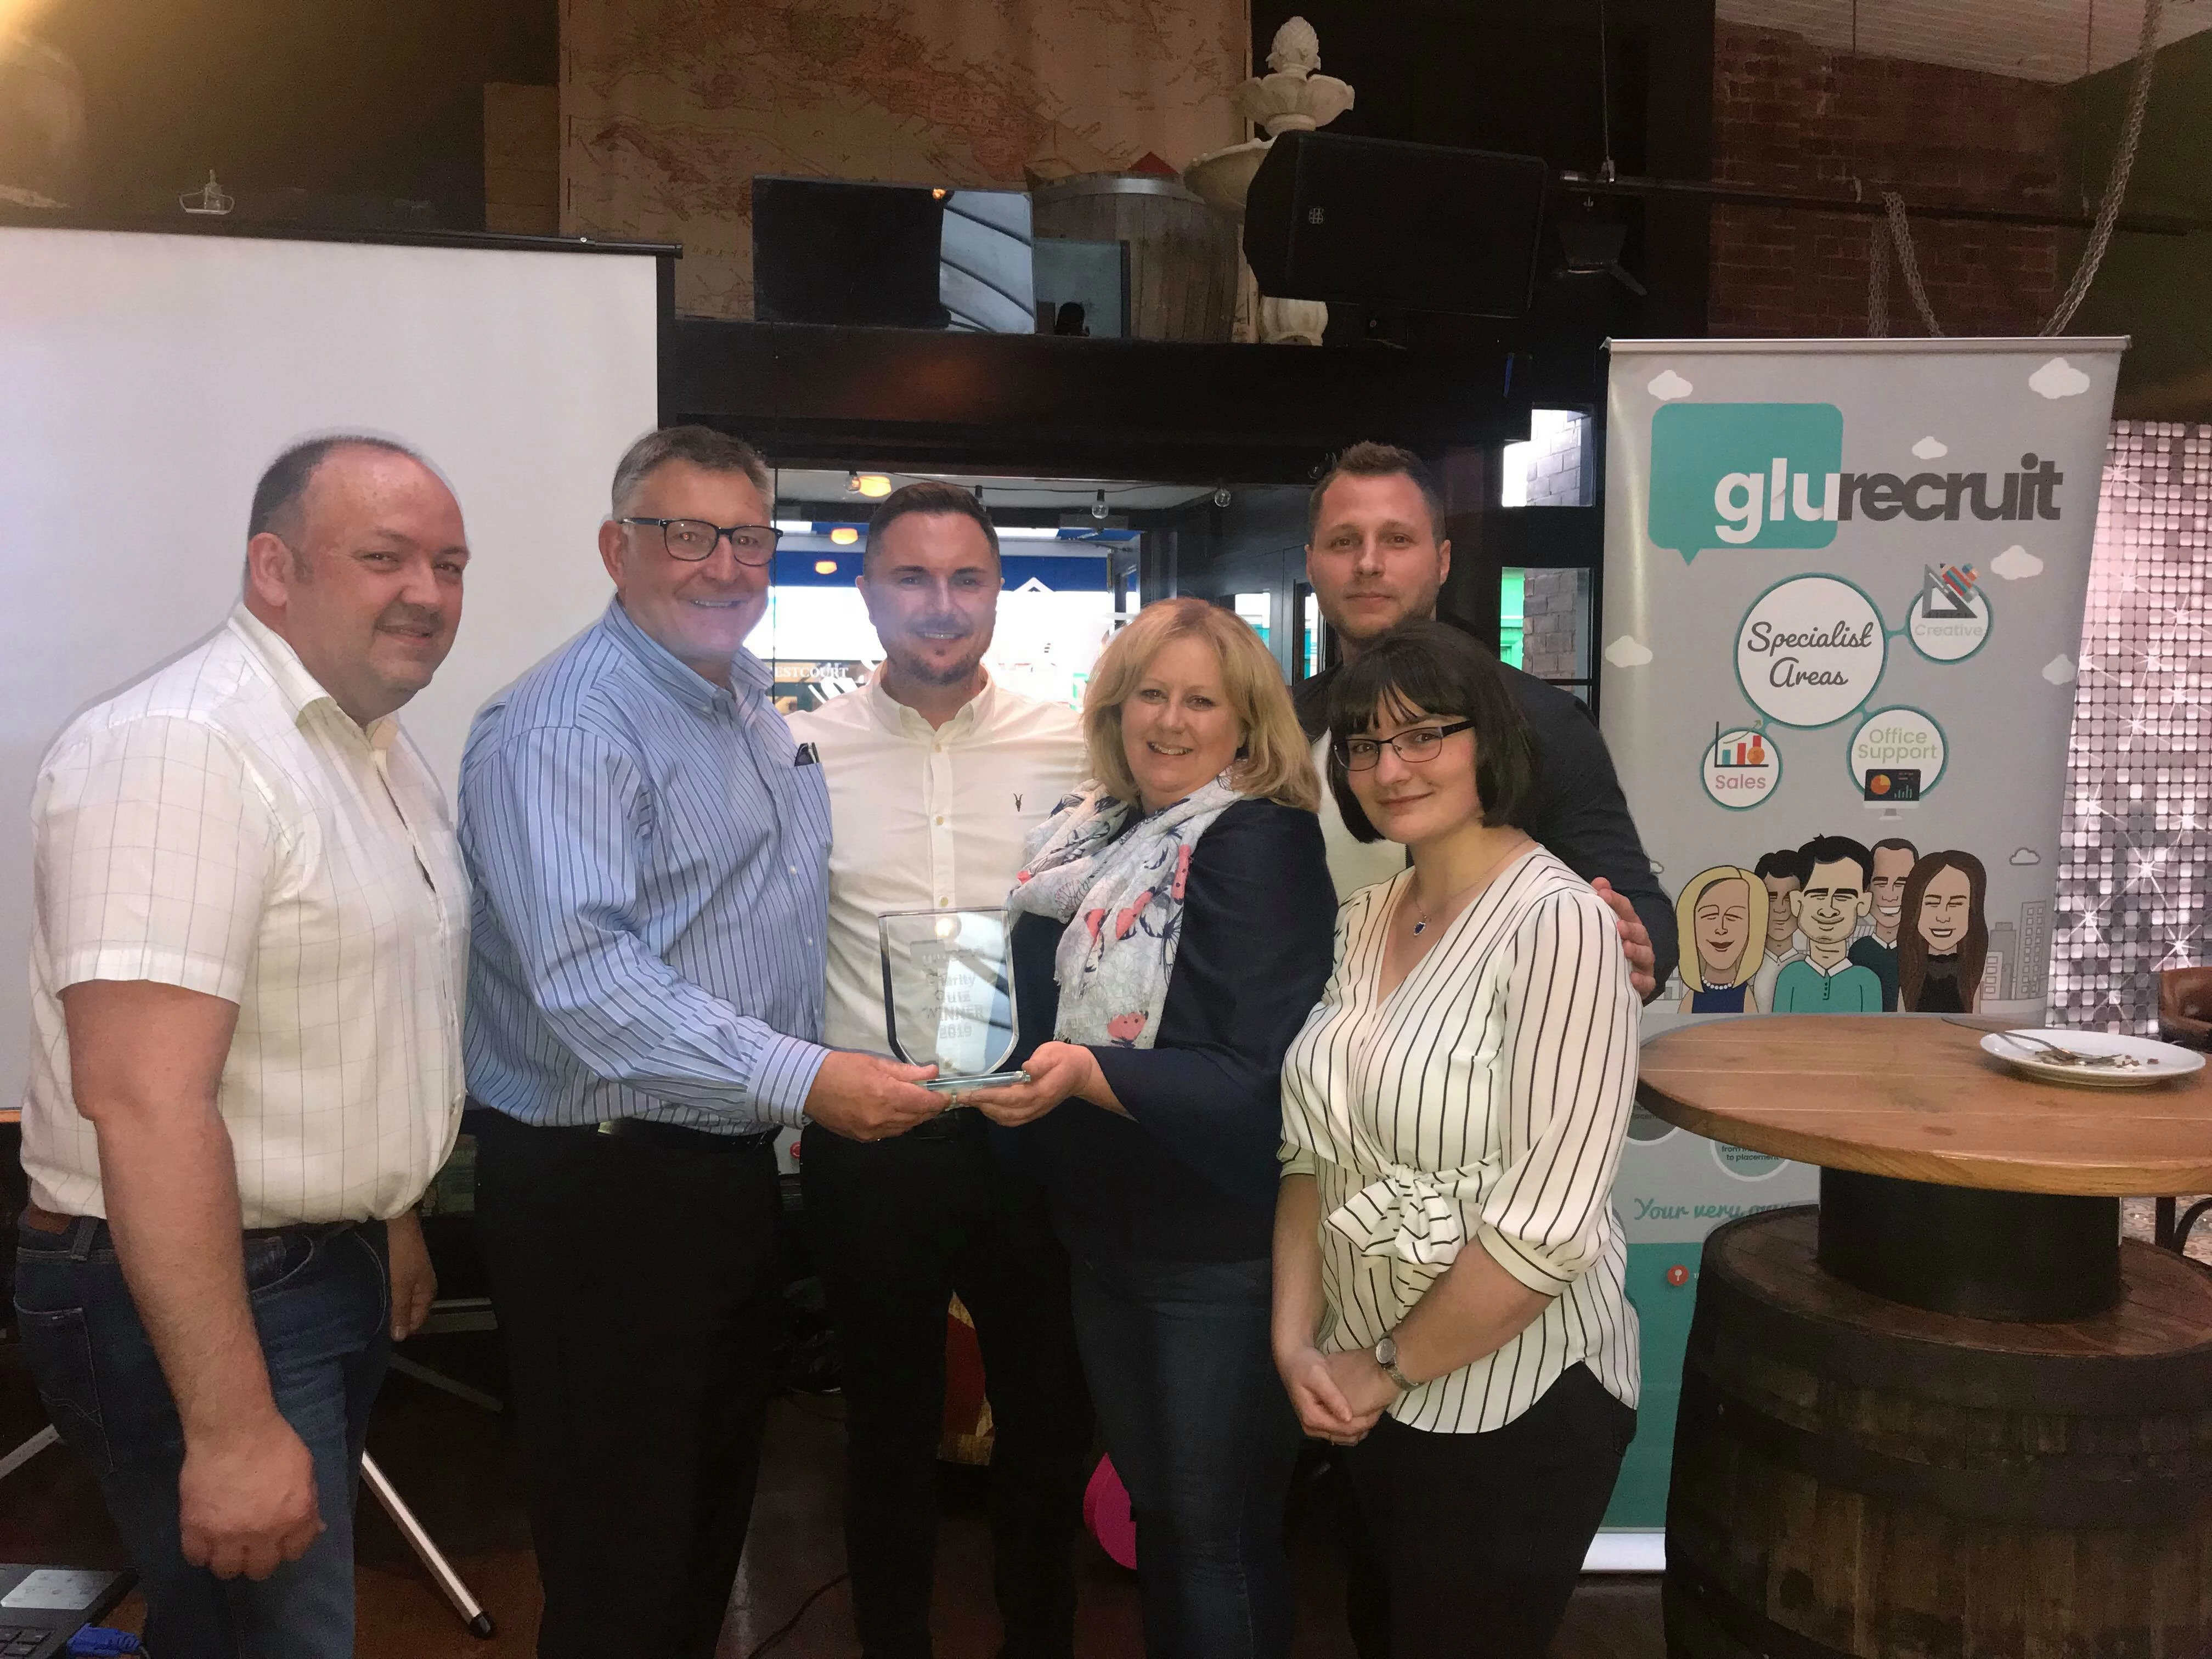 Quiz winners from Rotherham & Barnsley Chamber of Commerce with Rob Shaw, Managing Director at Glu Recruit